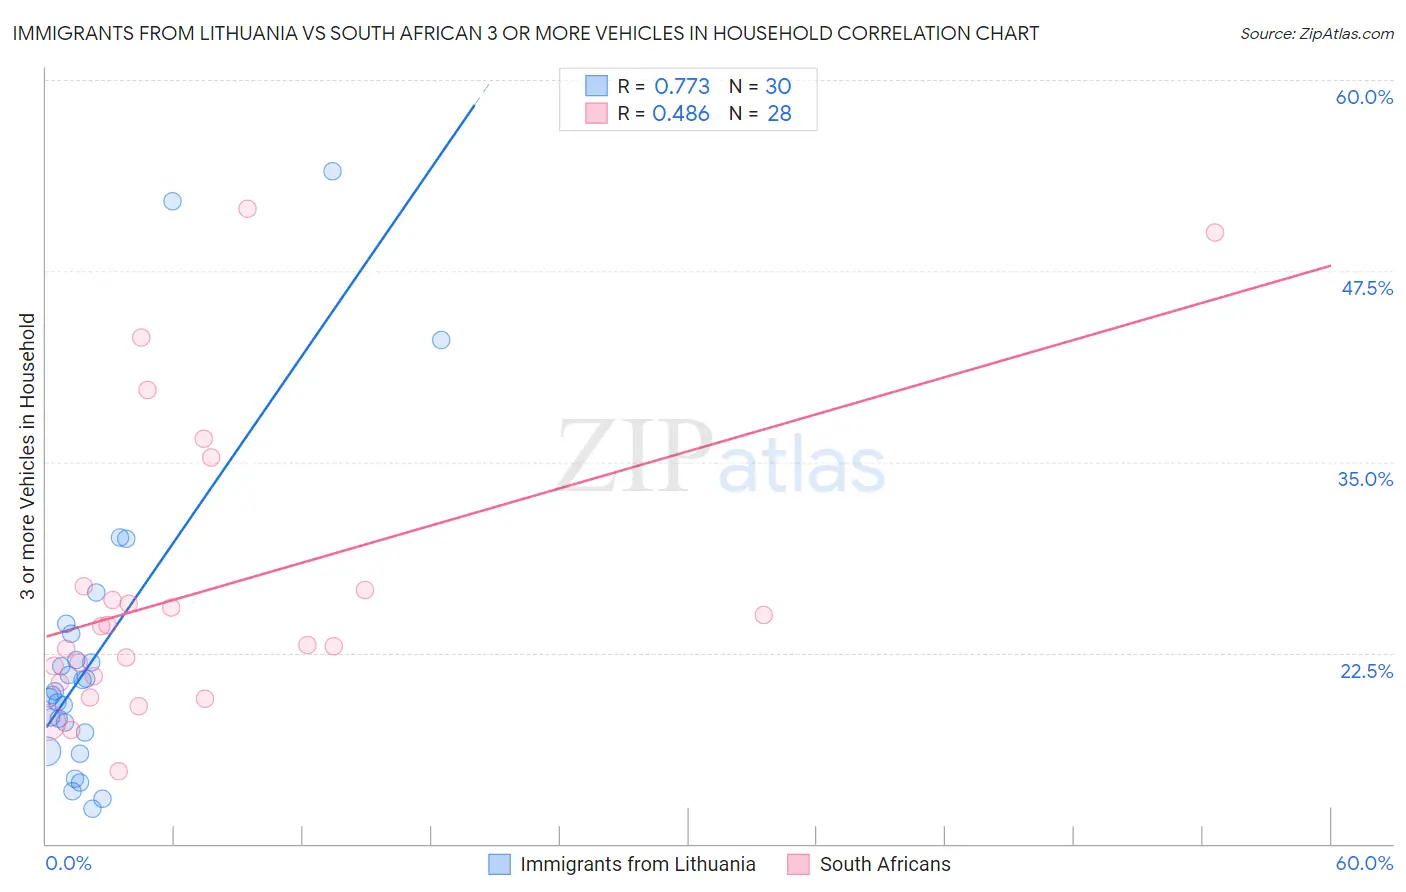 Immigrants from Lithuania vs South African 3 or more Vehicles in Household